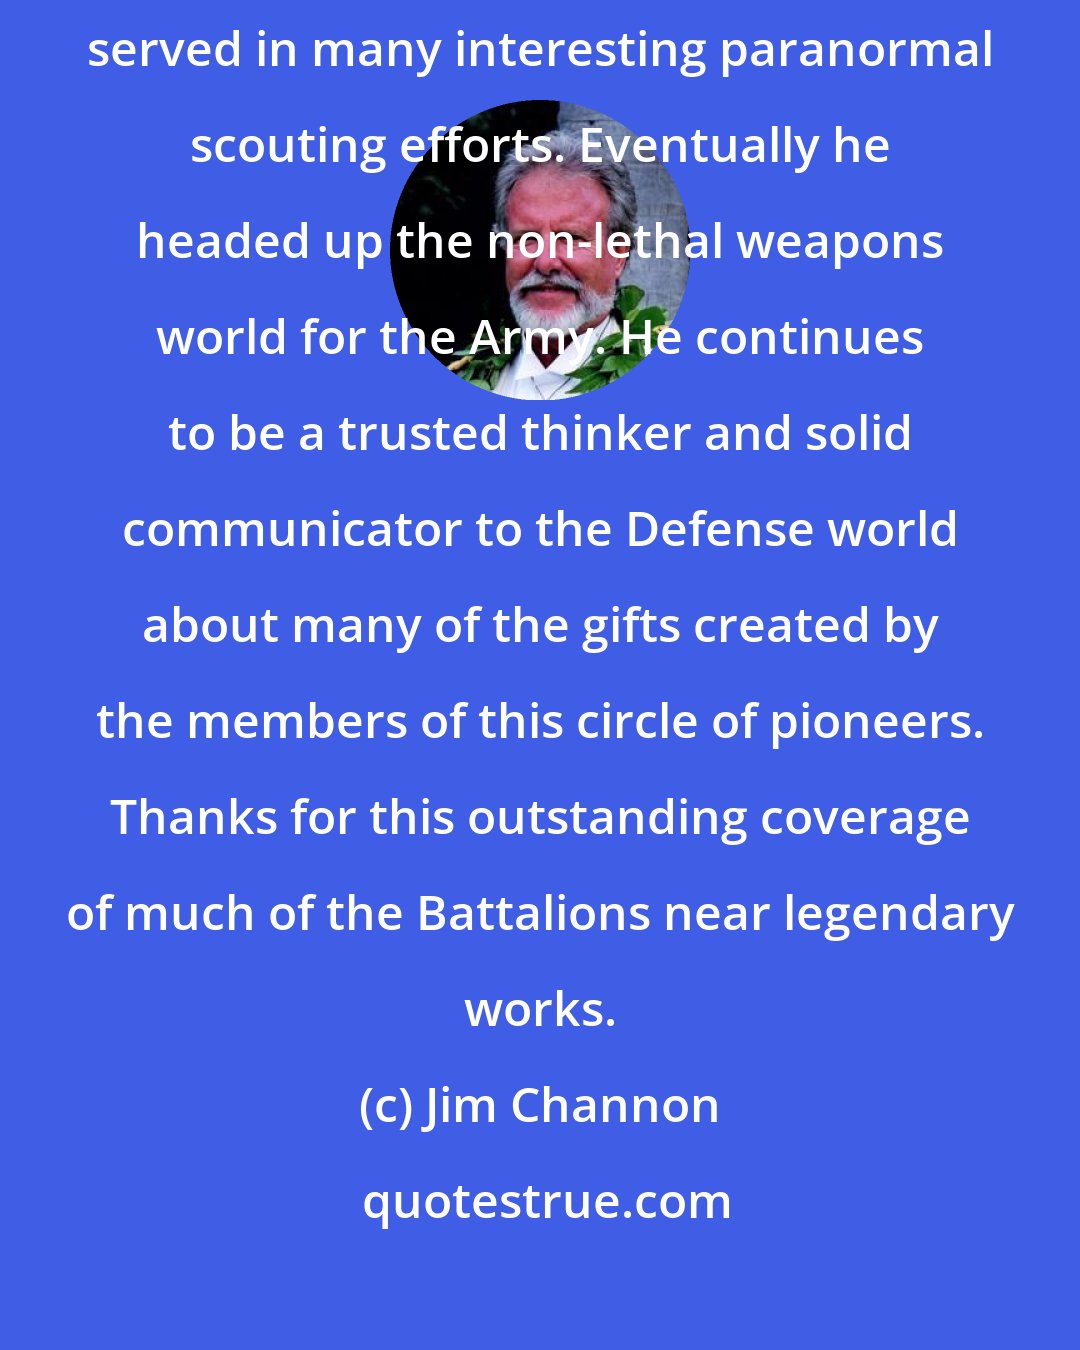 Jim Channon: Colonel John Alexander was an original member of the Earth Battalion and served in many interesting paranormal scouting efforts. Eventually he headed up the non-lethal weapons world for the Army. He continues to be a trusted thinker and solid communicator to the Defense world about many of the gifts created by the members of this circle of pioneers. Thanks for this outstanding coverage of much of the Battalions near legendary works.